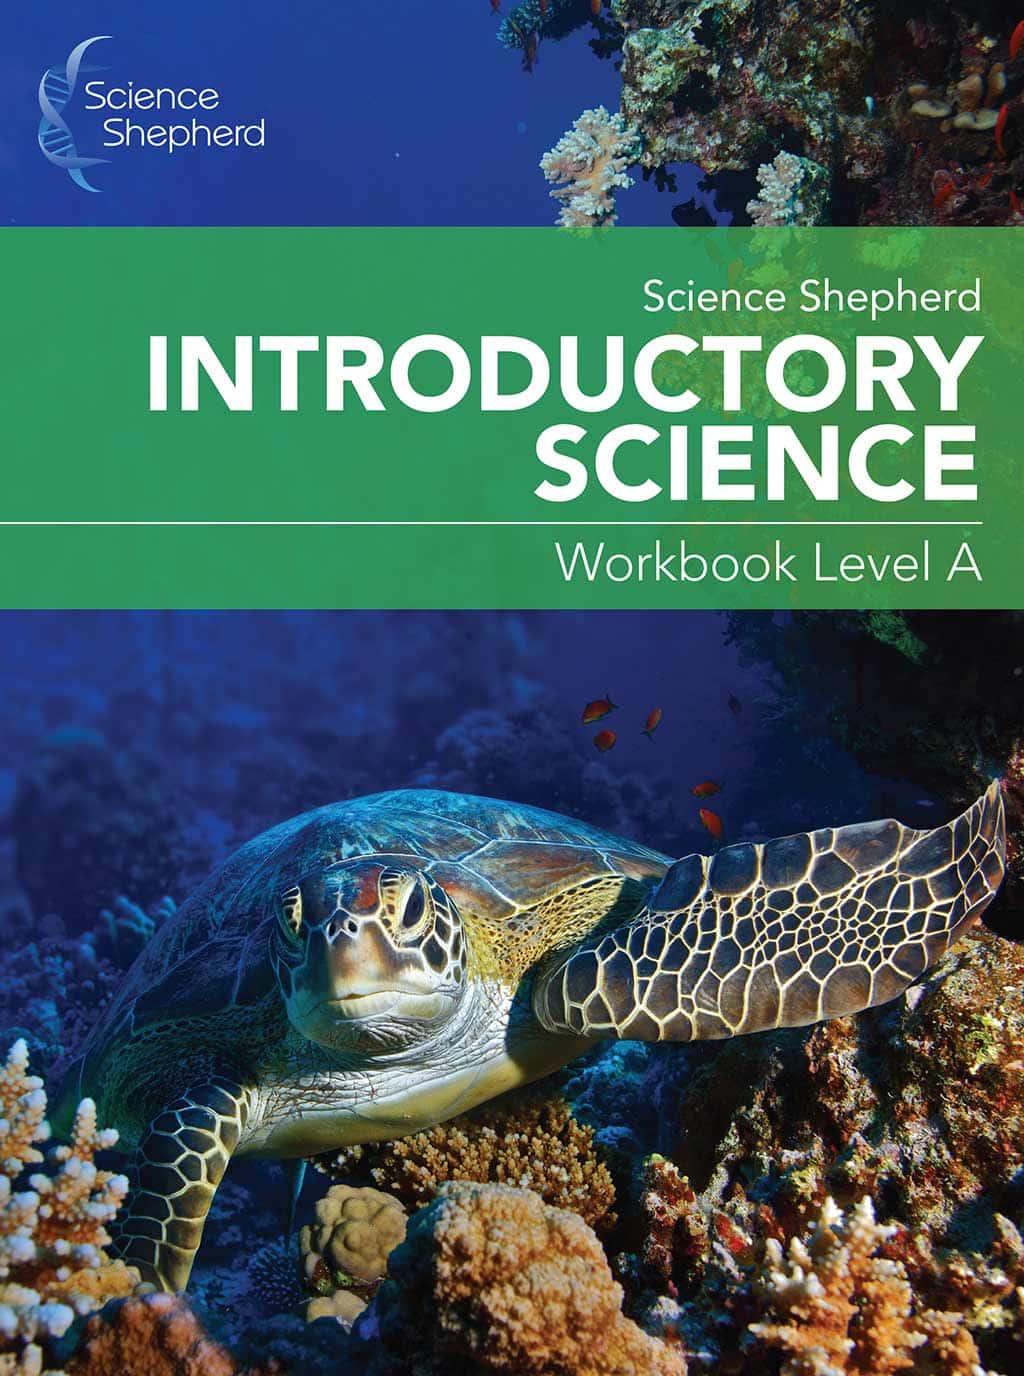 Homeschool Introductory Science curriculum Workbook Level A cover of a turtle underwater